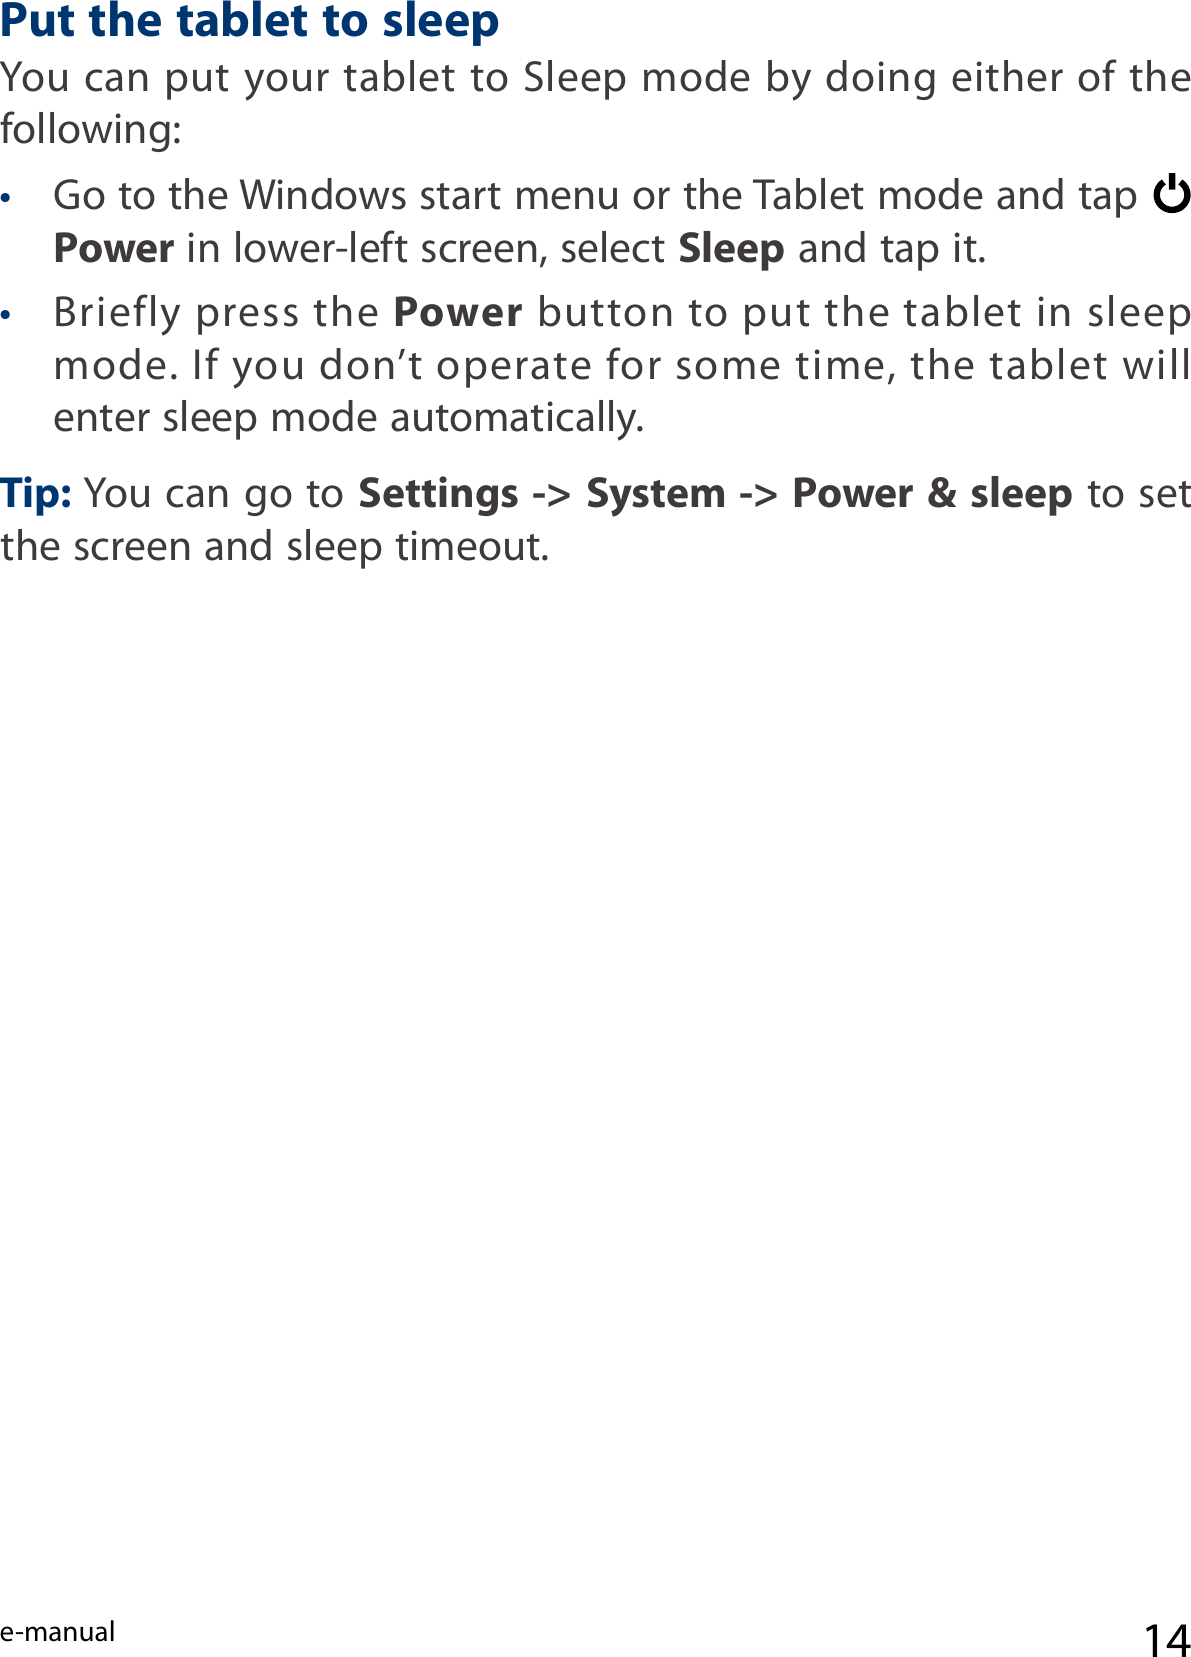 e-manual 14Put the tablet to sleep You can put your tablet to Sleep mode by doing either of the following:• Go to the Windows start menu or the Tablet mode and tap   Power in lower-left screen, select Sleep and tap it.• Briefly press the Power button to put the tablet in sleep mode. If you don’t operate for some time, the tablet will enter sleep mode automatically. Tip: You can go to Settings -&gt; System -&gt; Power &amp; sleep to set the screen and sleep timeout.